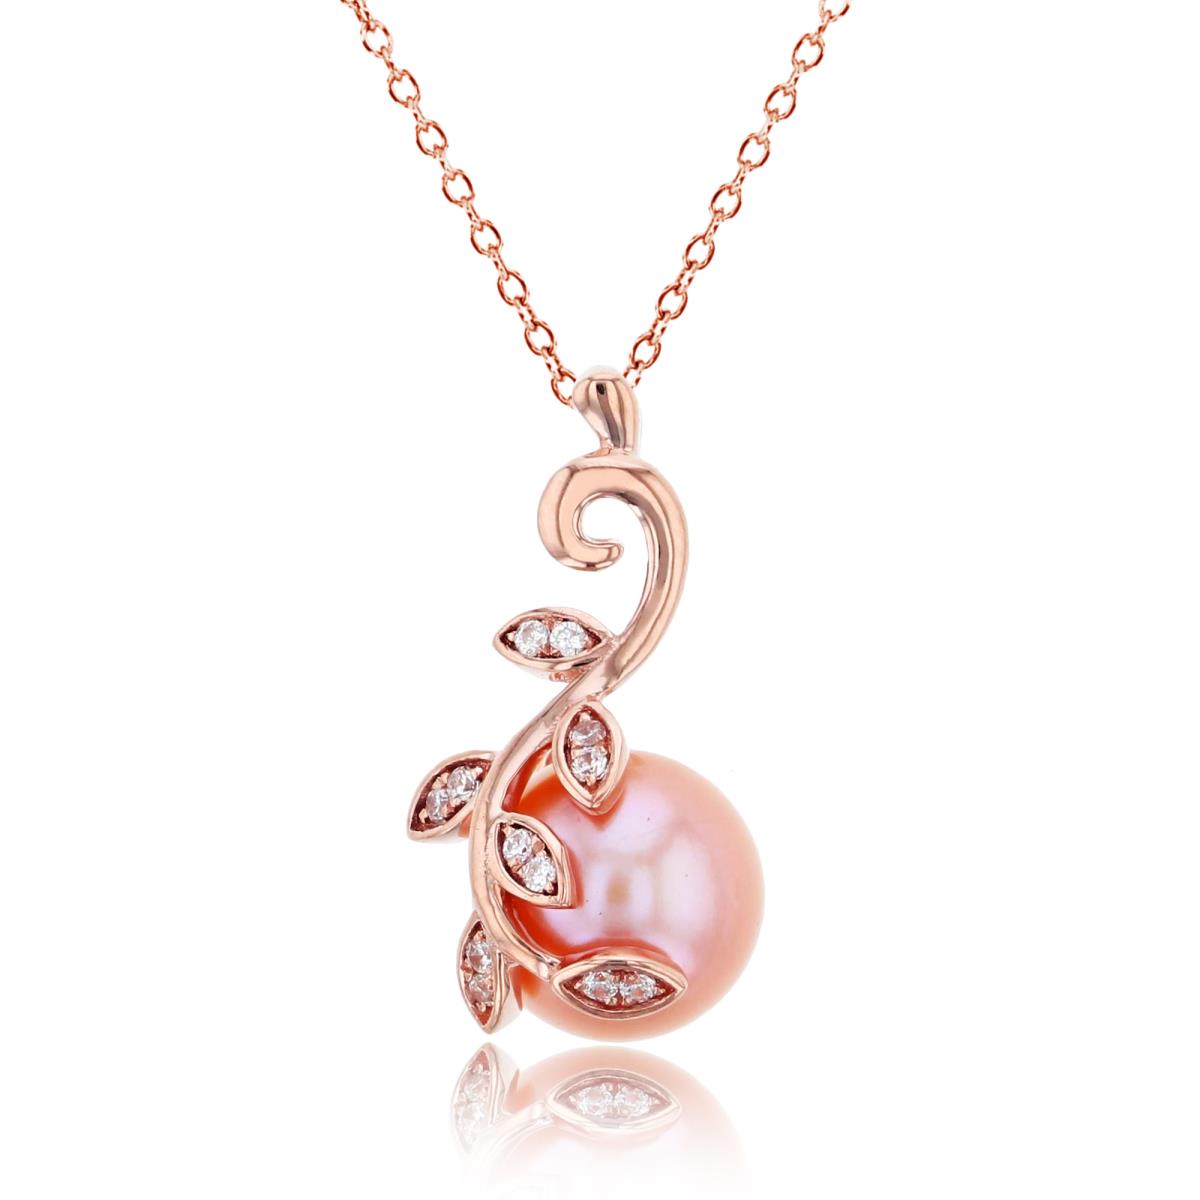 10K Rose Gold 0.05 CTTW Rnd Diam & 8mm Rnd Pink Pearl with Leaves 18"Necklace